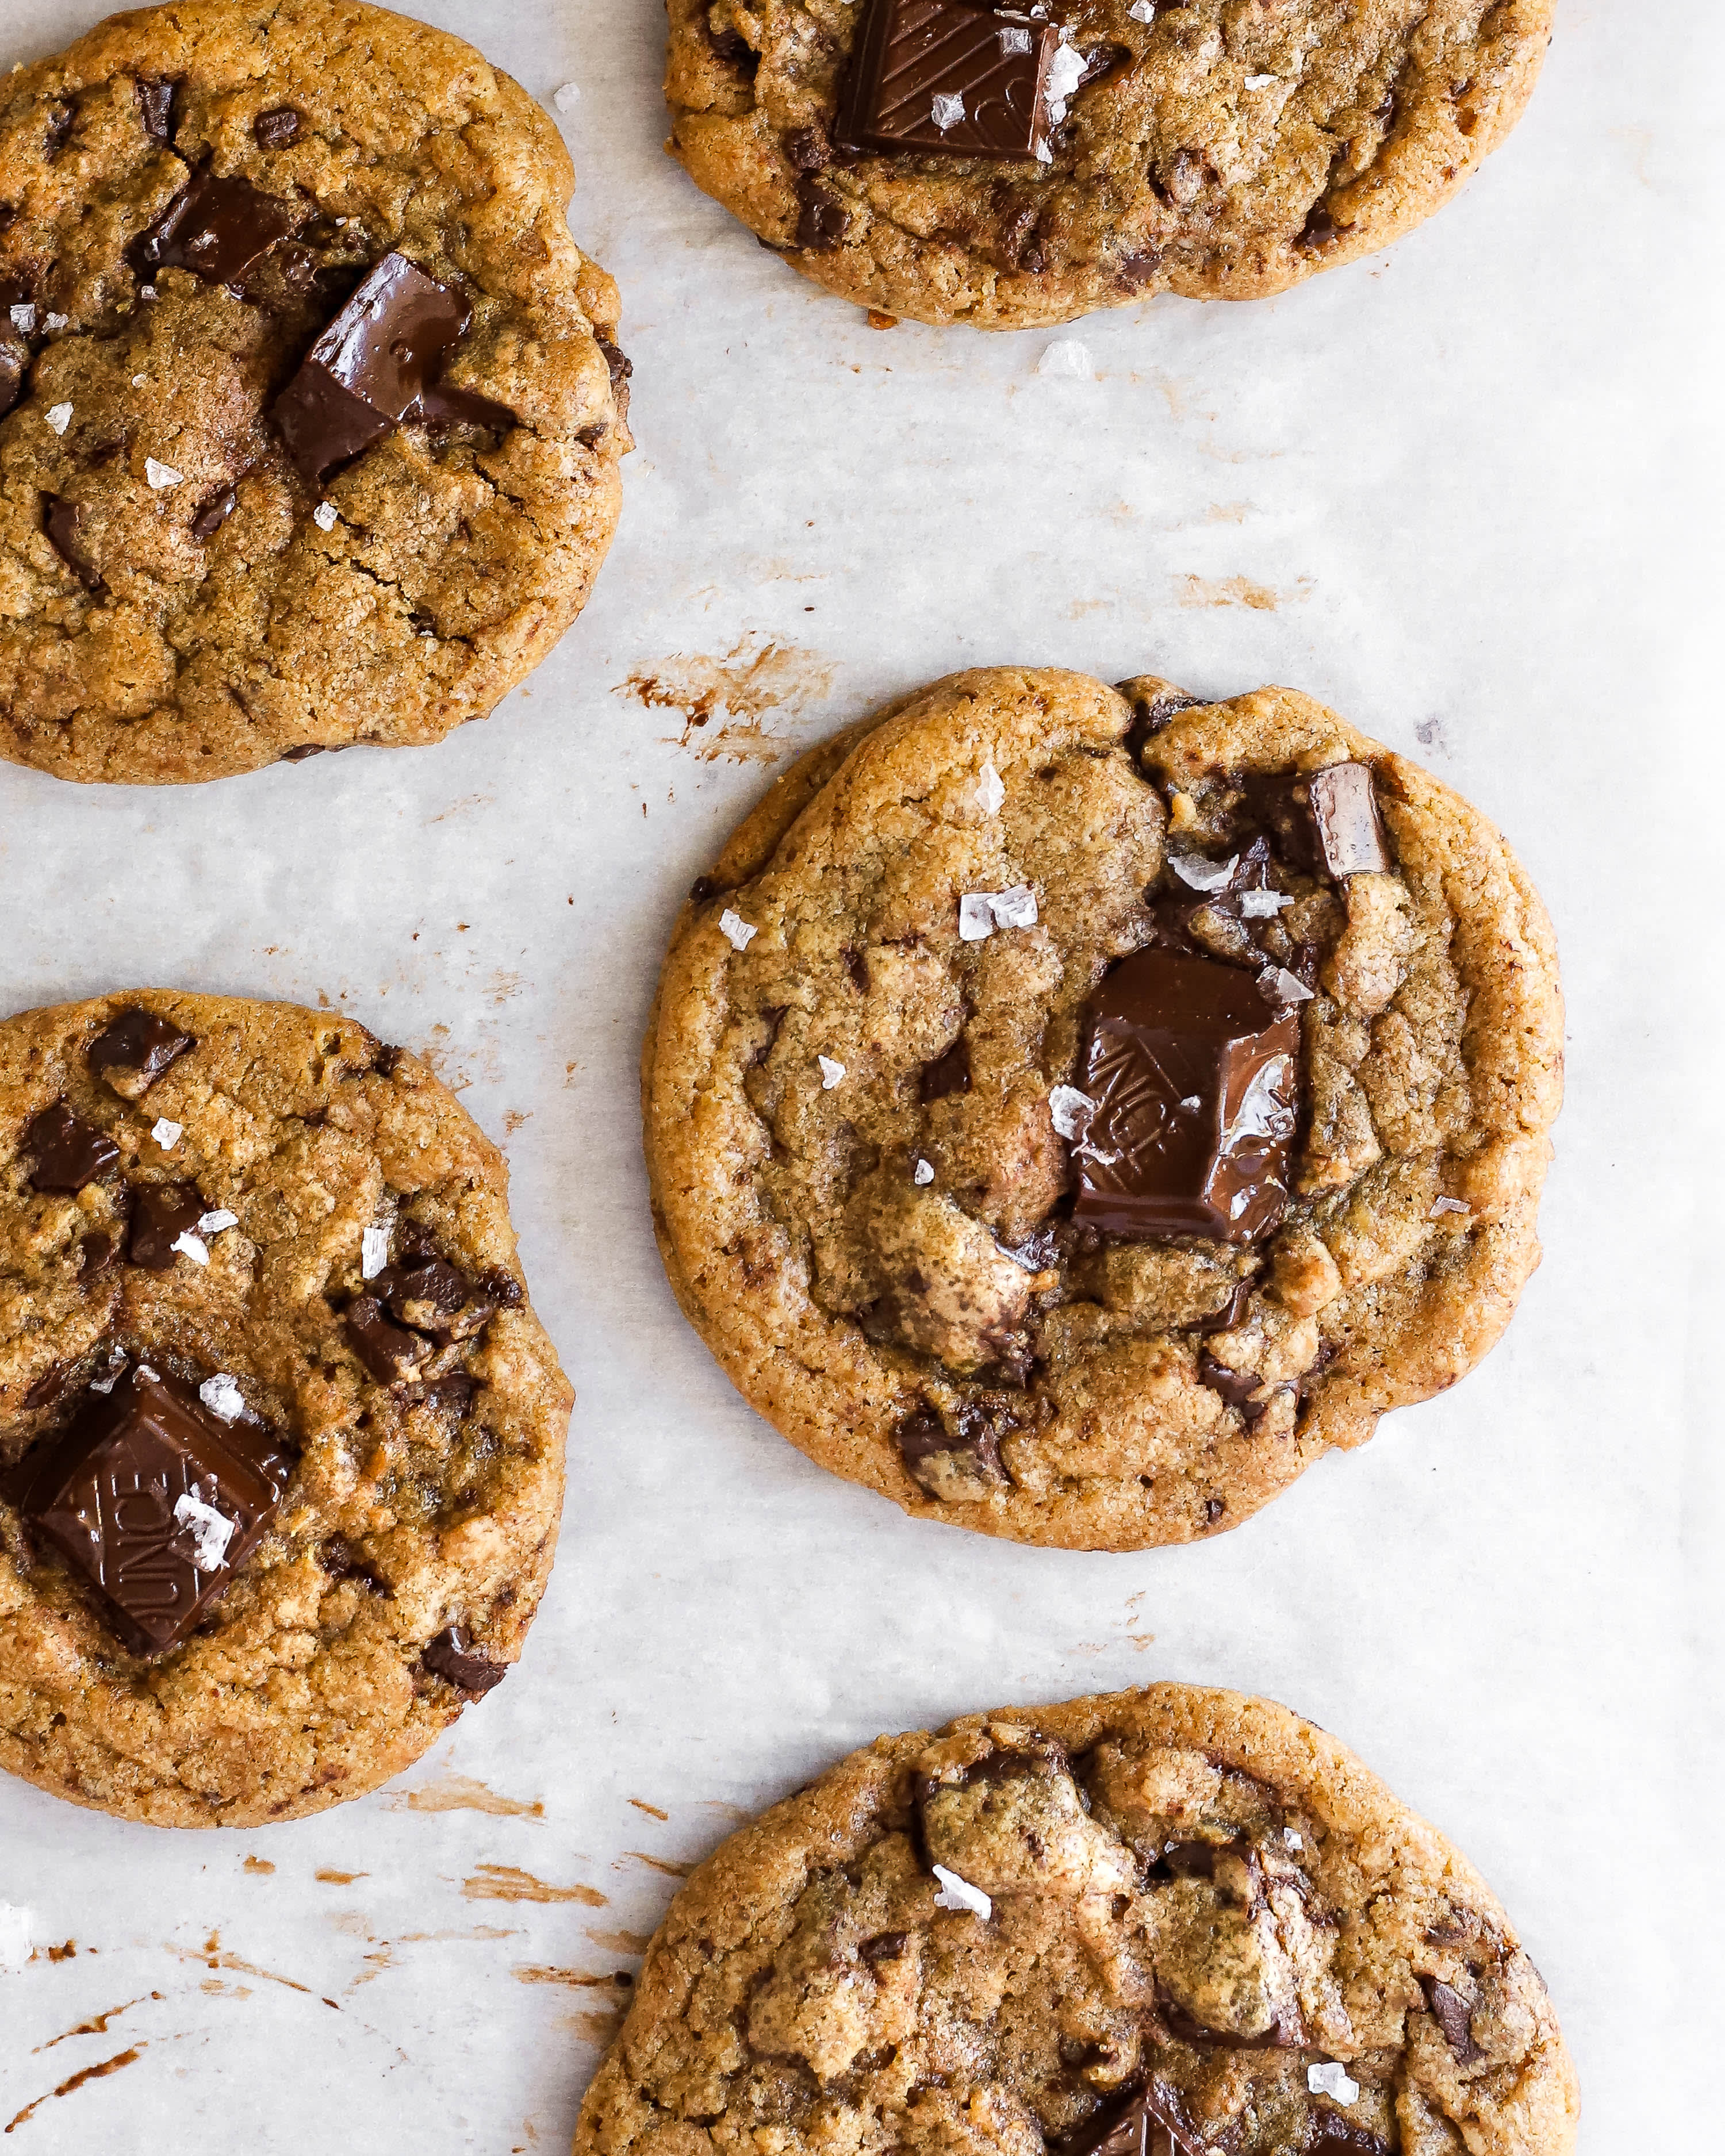 Brown Butter Walnut Chocolate Chip Cookies - Del's cooking twist